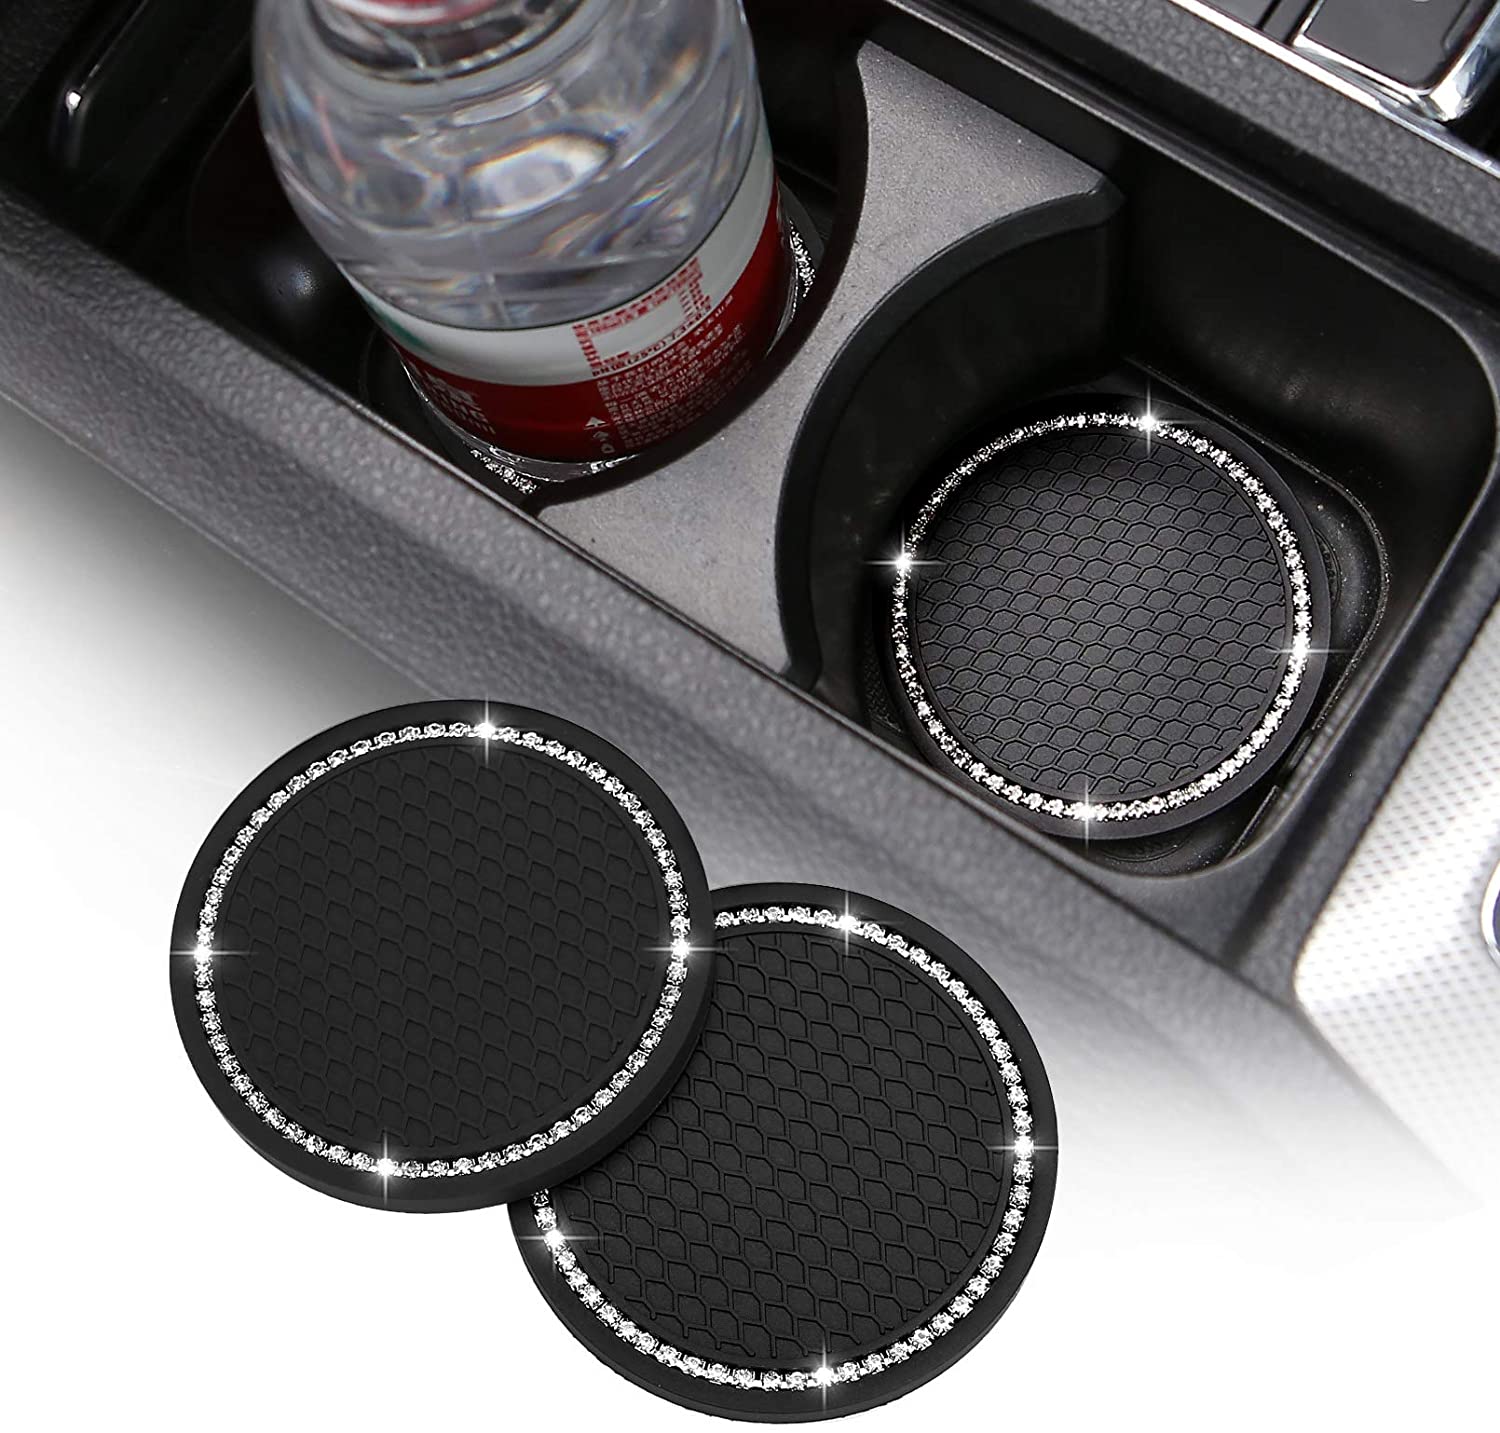 2 Pack Bling Car Cup Holder Coasters, 2.75 Inch Soft Bling Crystal  Rhinestone Rubber Pad Set Round Auto Cup Holder Insert Drink Coaster Car  Interior Accessories 